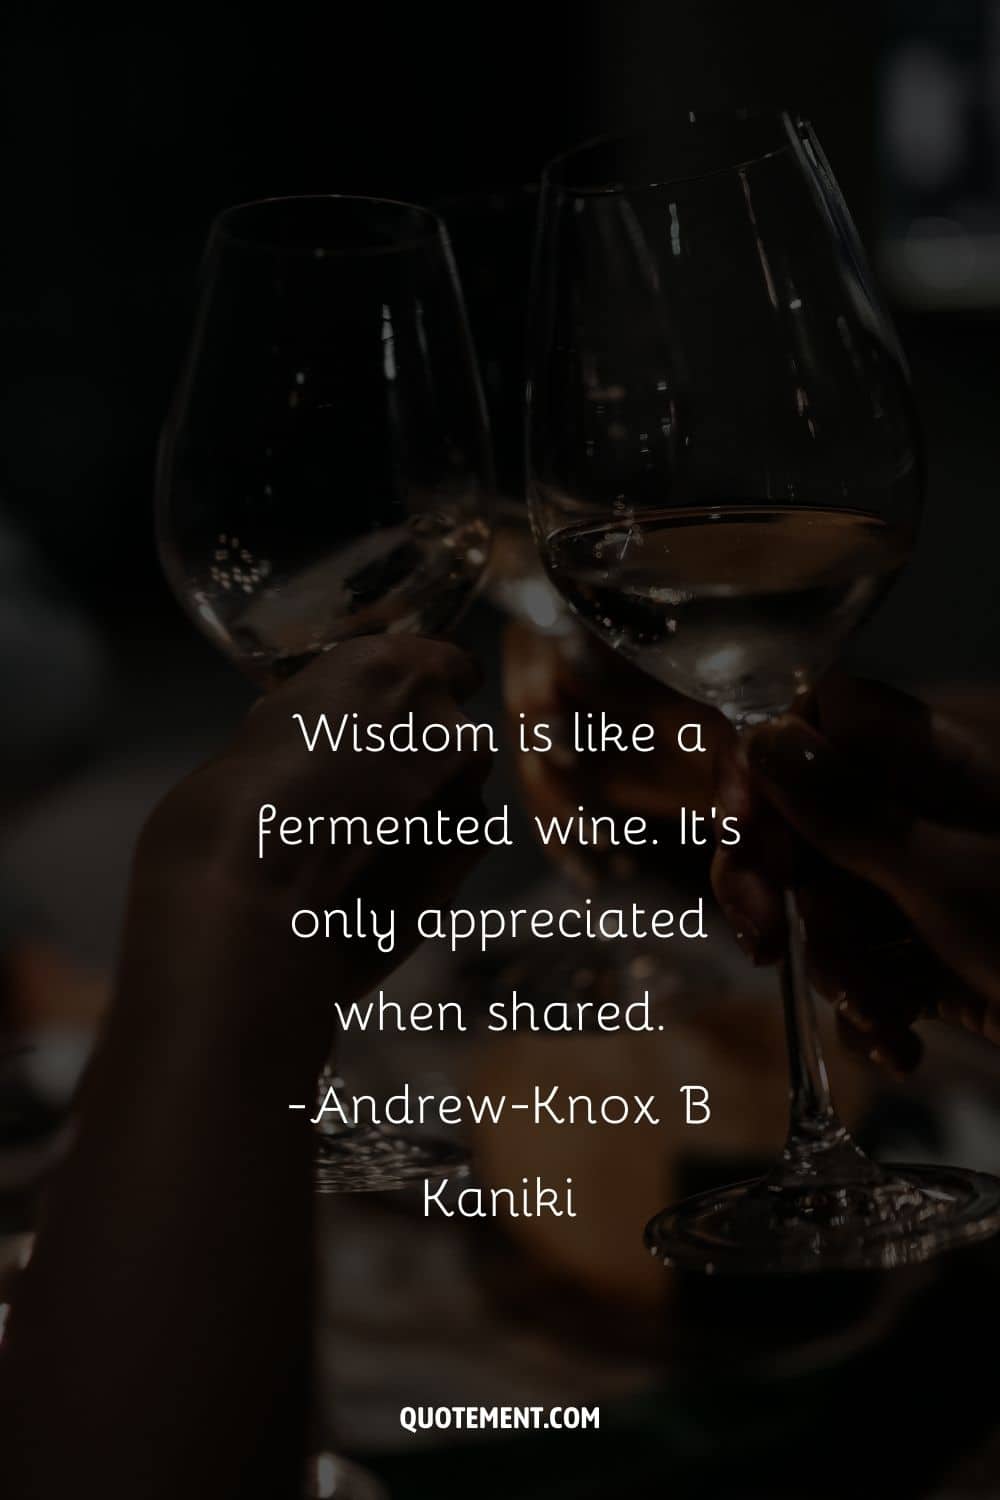 Wisdom is like a fermented wine. It’s only appreciated when shared